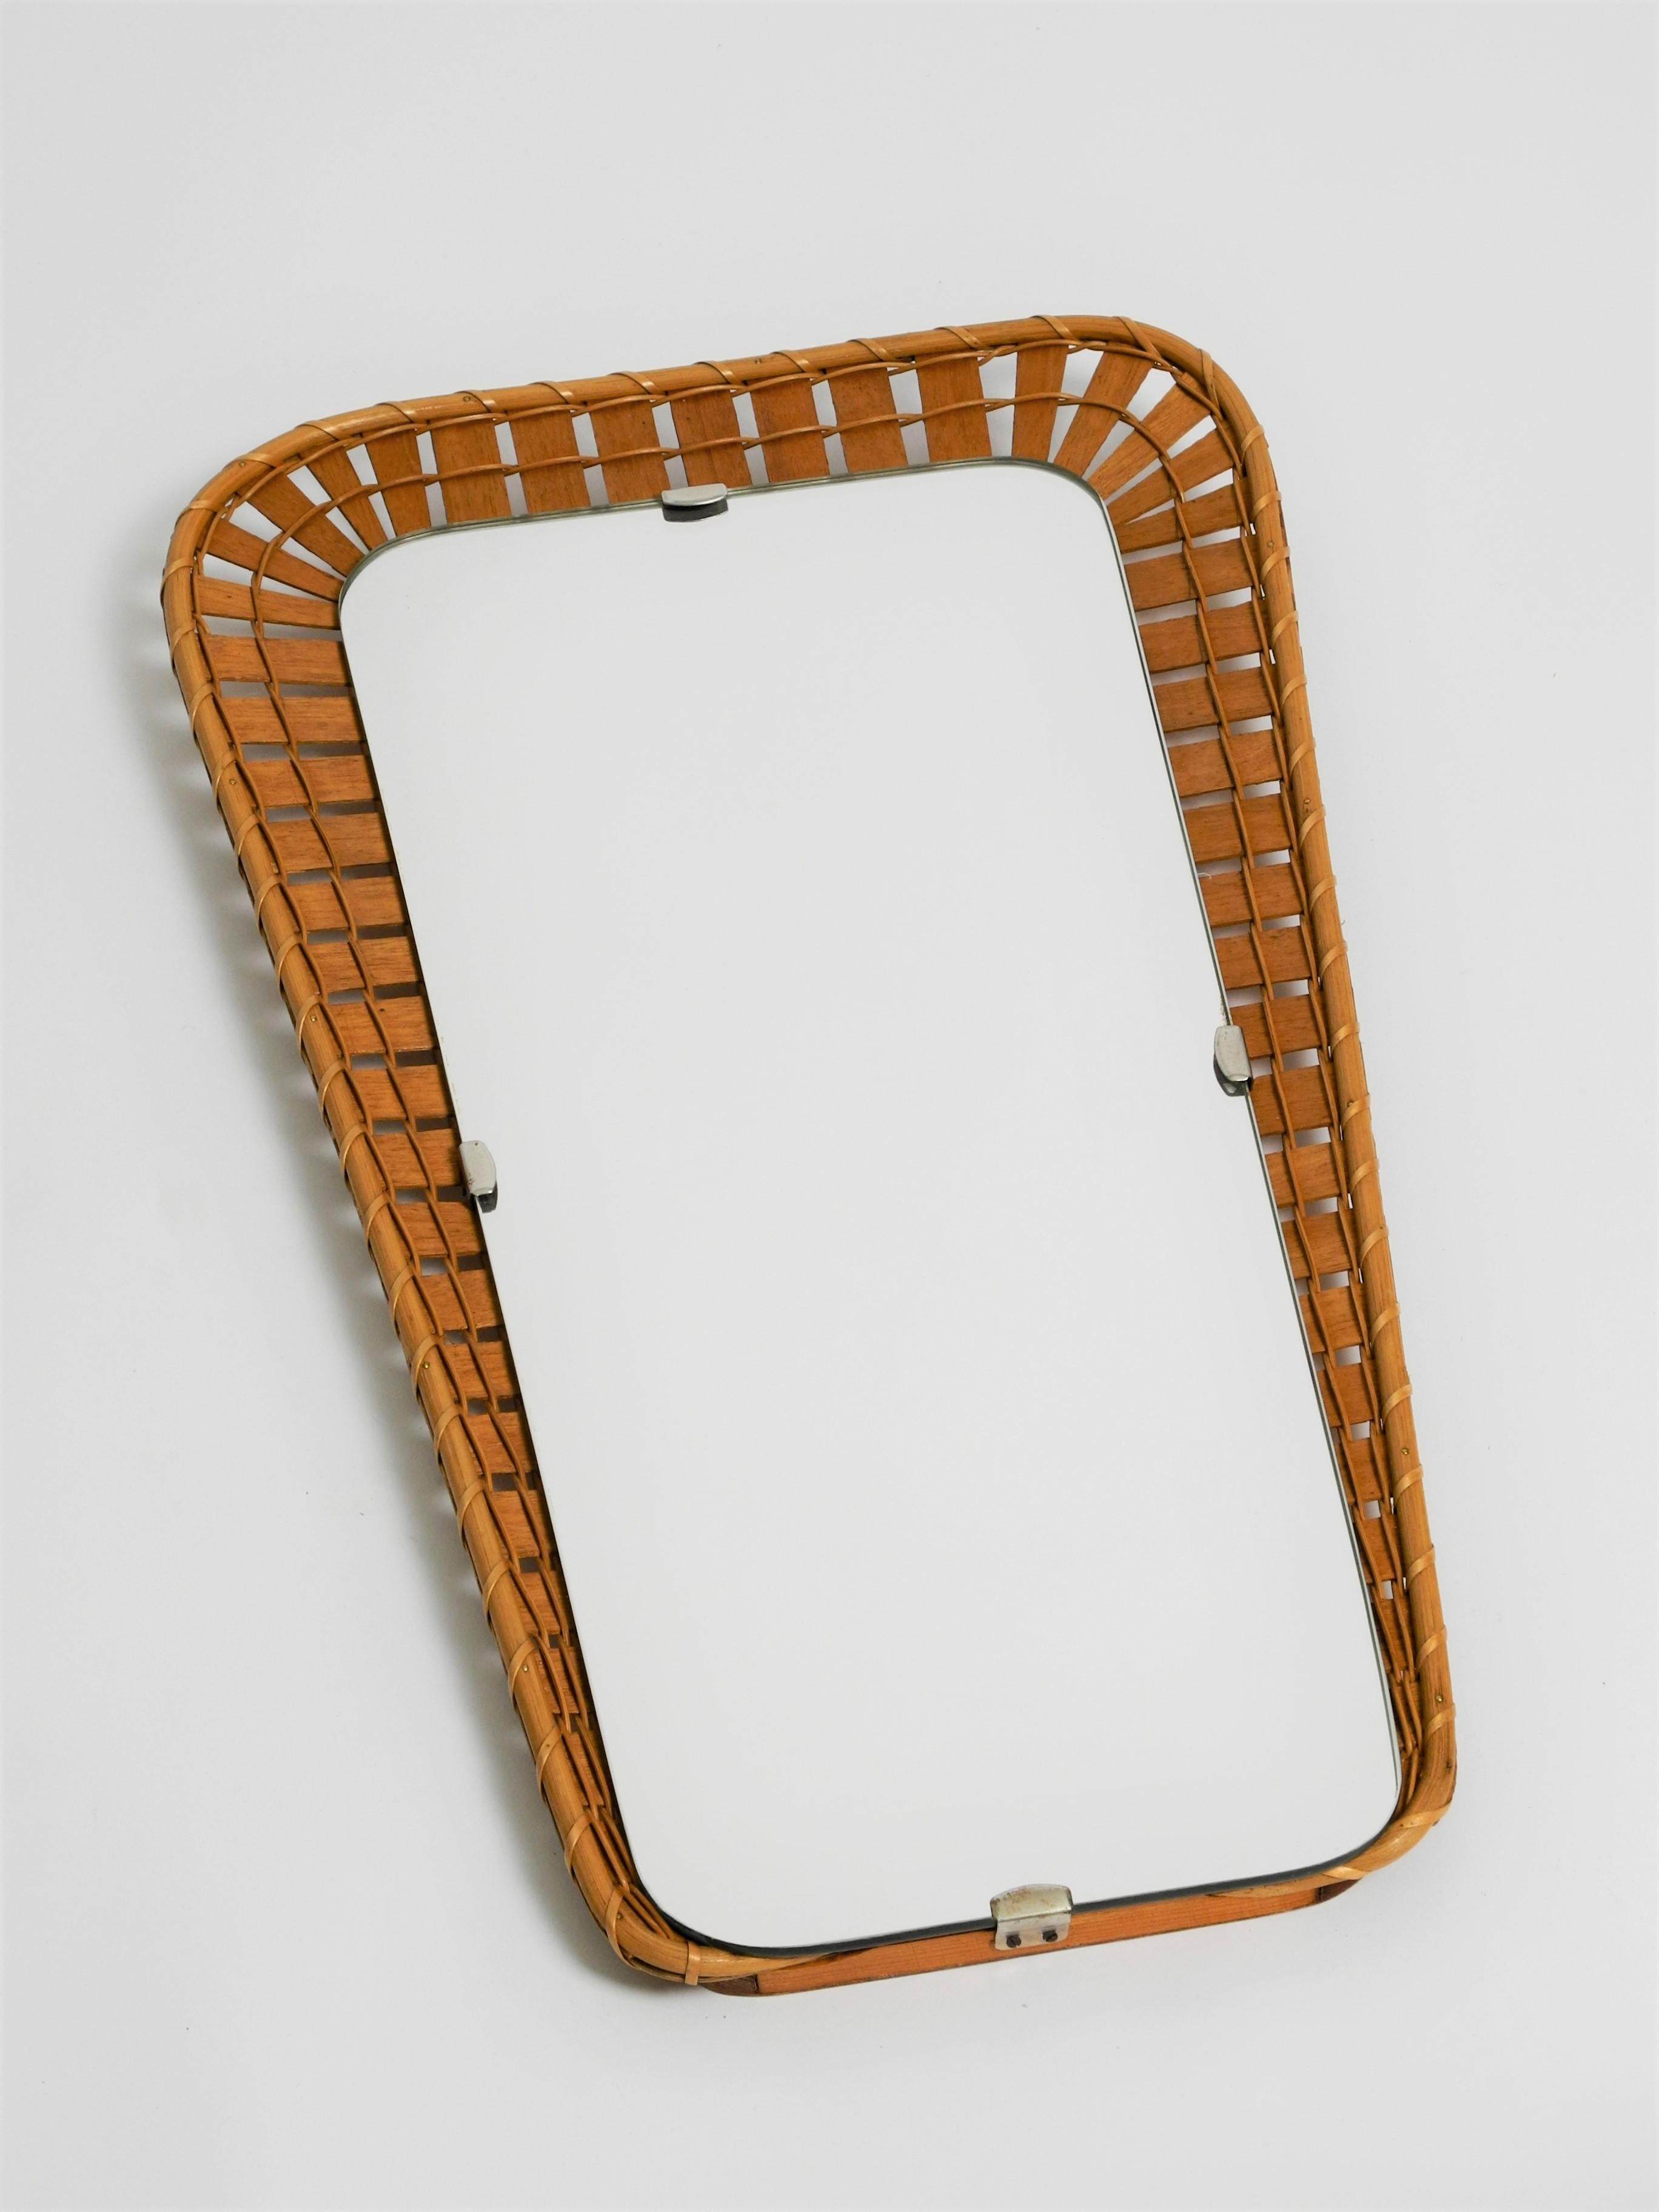 Vintage trapezoidal rattan mirror with wooden back panel, Italy, 70s.

Dimensions:
Total height 60cm/23,6inch
Width top 35cm/13,8inch
Width buttom 22cm/8,7inch
Height of mirror 54cm/21,3inch
Width of mirror top 24,5cm/9,7inch
Width of mirror buttom